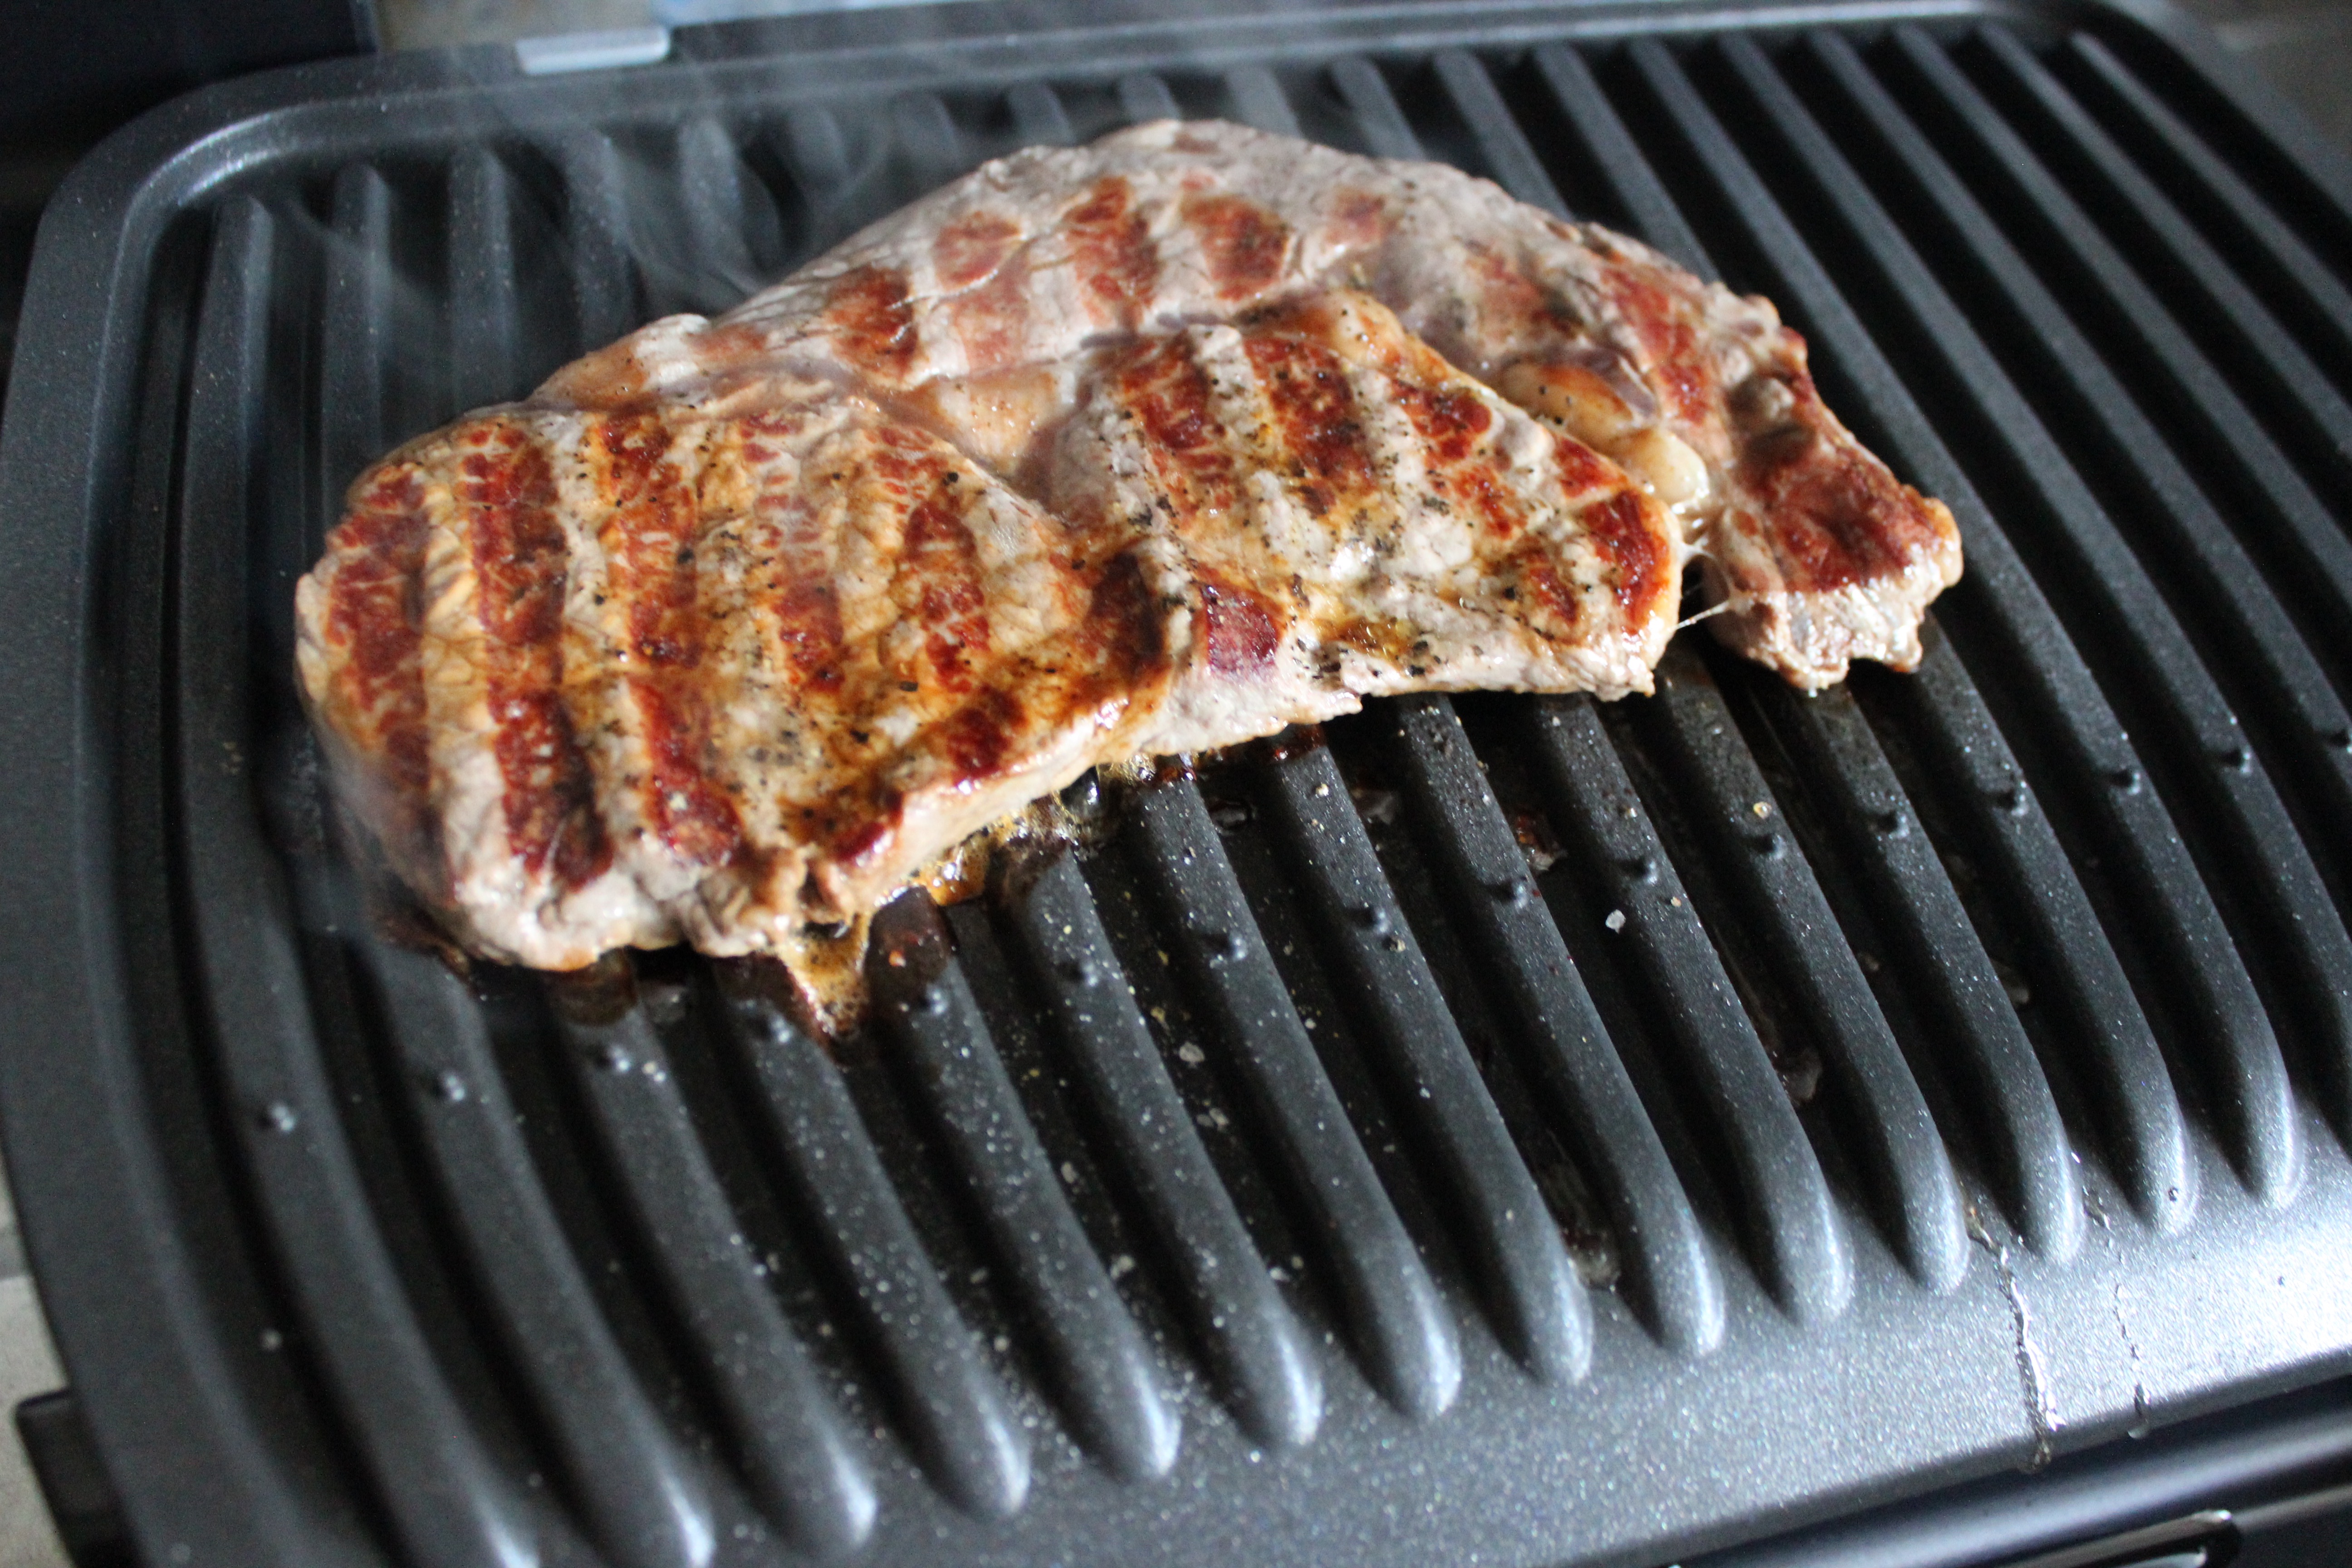 Tefal OptiGrill cooks everyone the perfect steak all at the same time